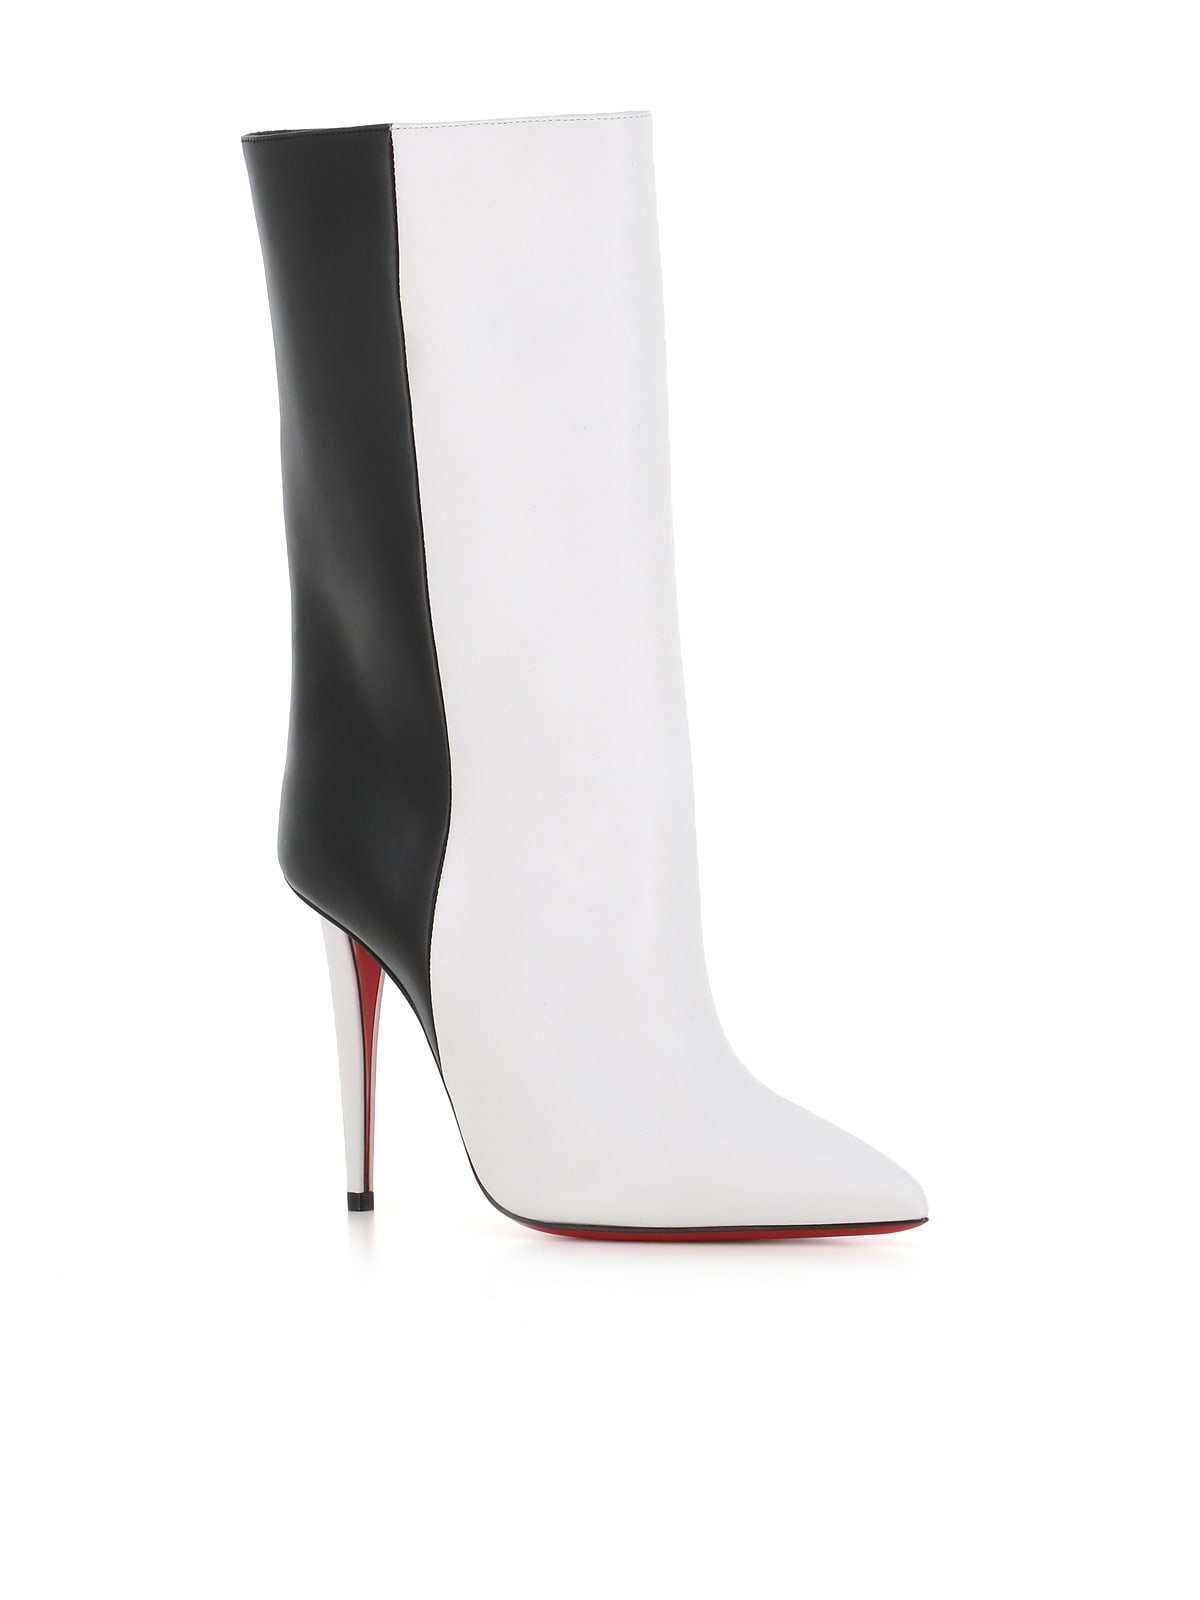 Christian Louboutin Santia Botta Suede-leather Boots 85 in Black